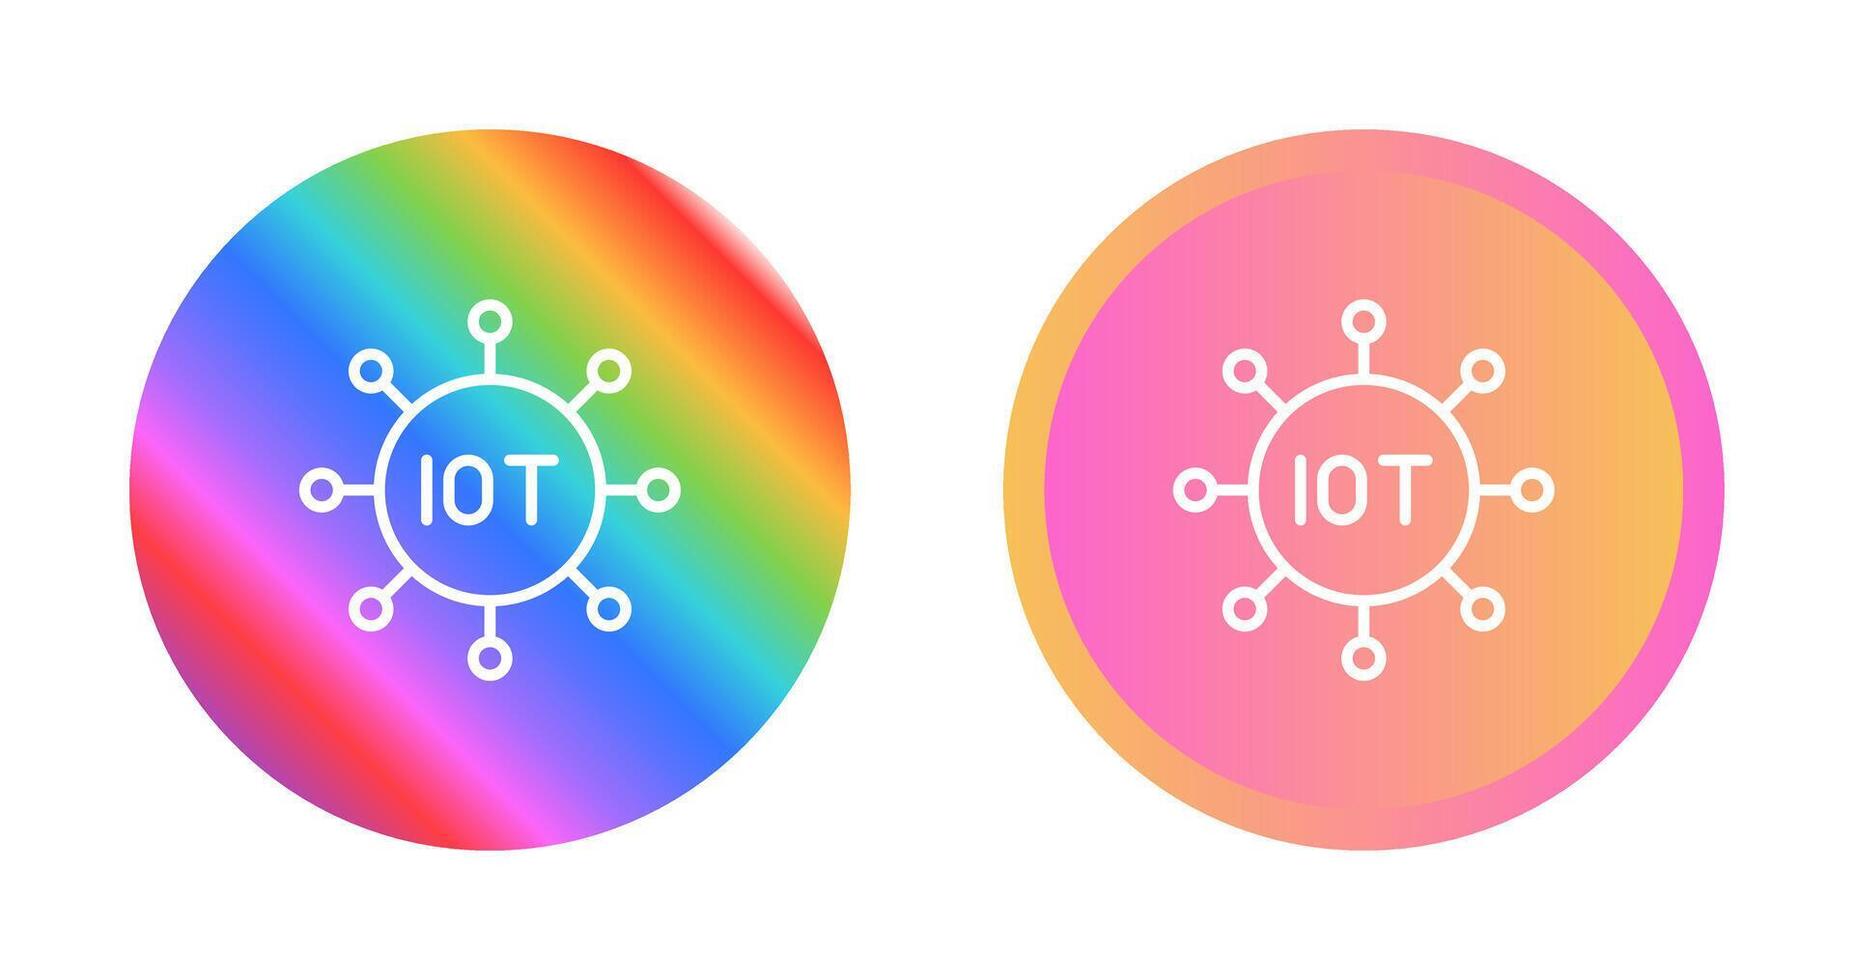 Internet of Things Vector Icon